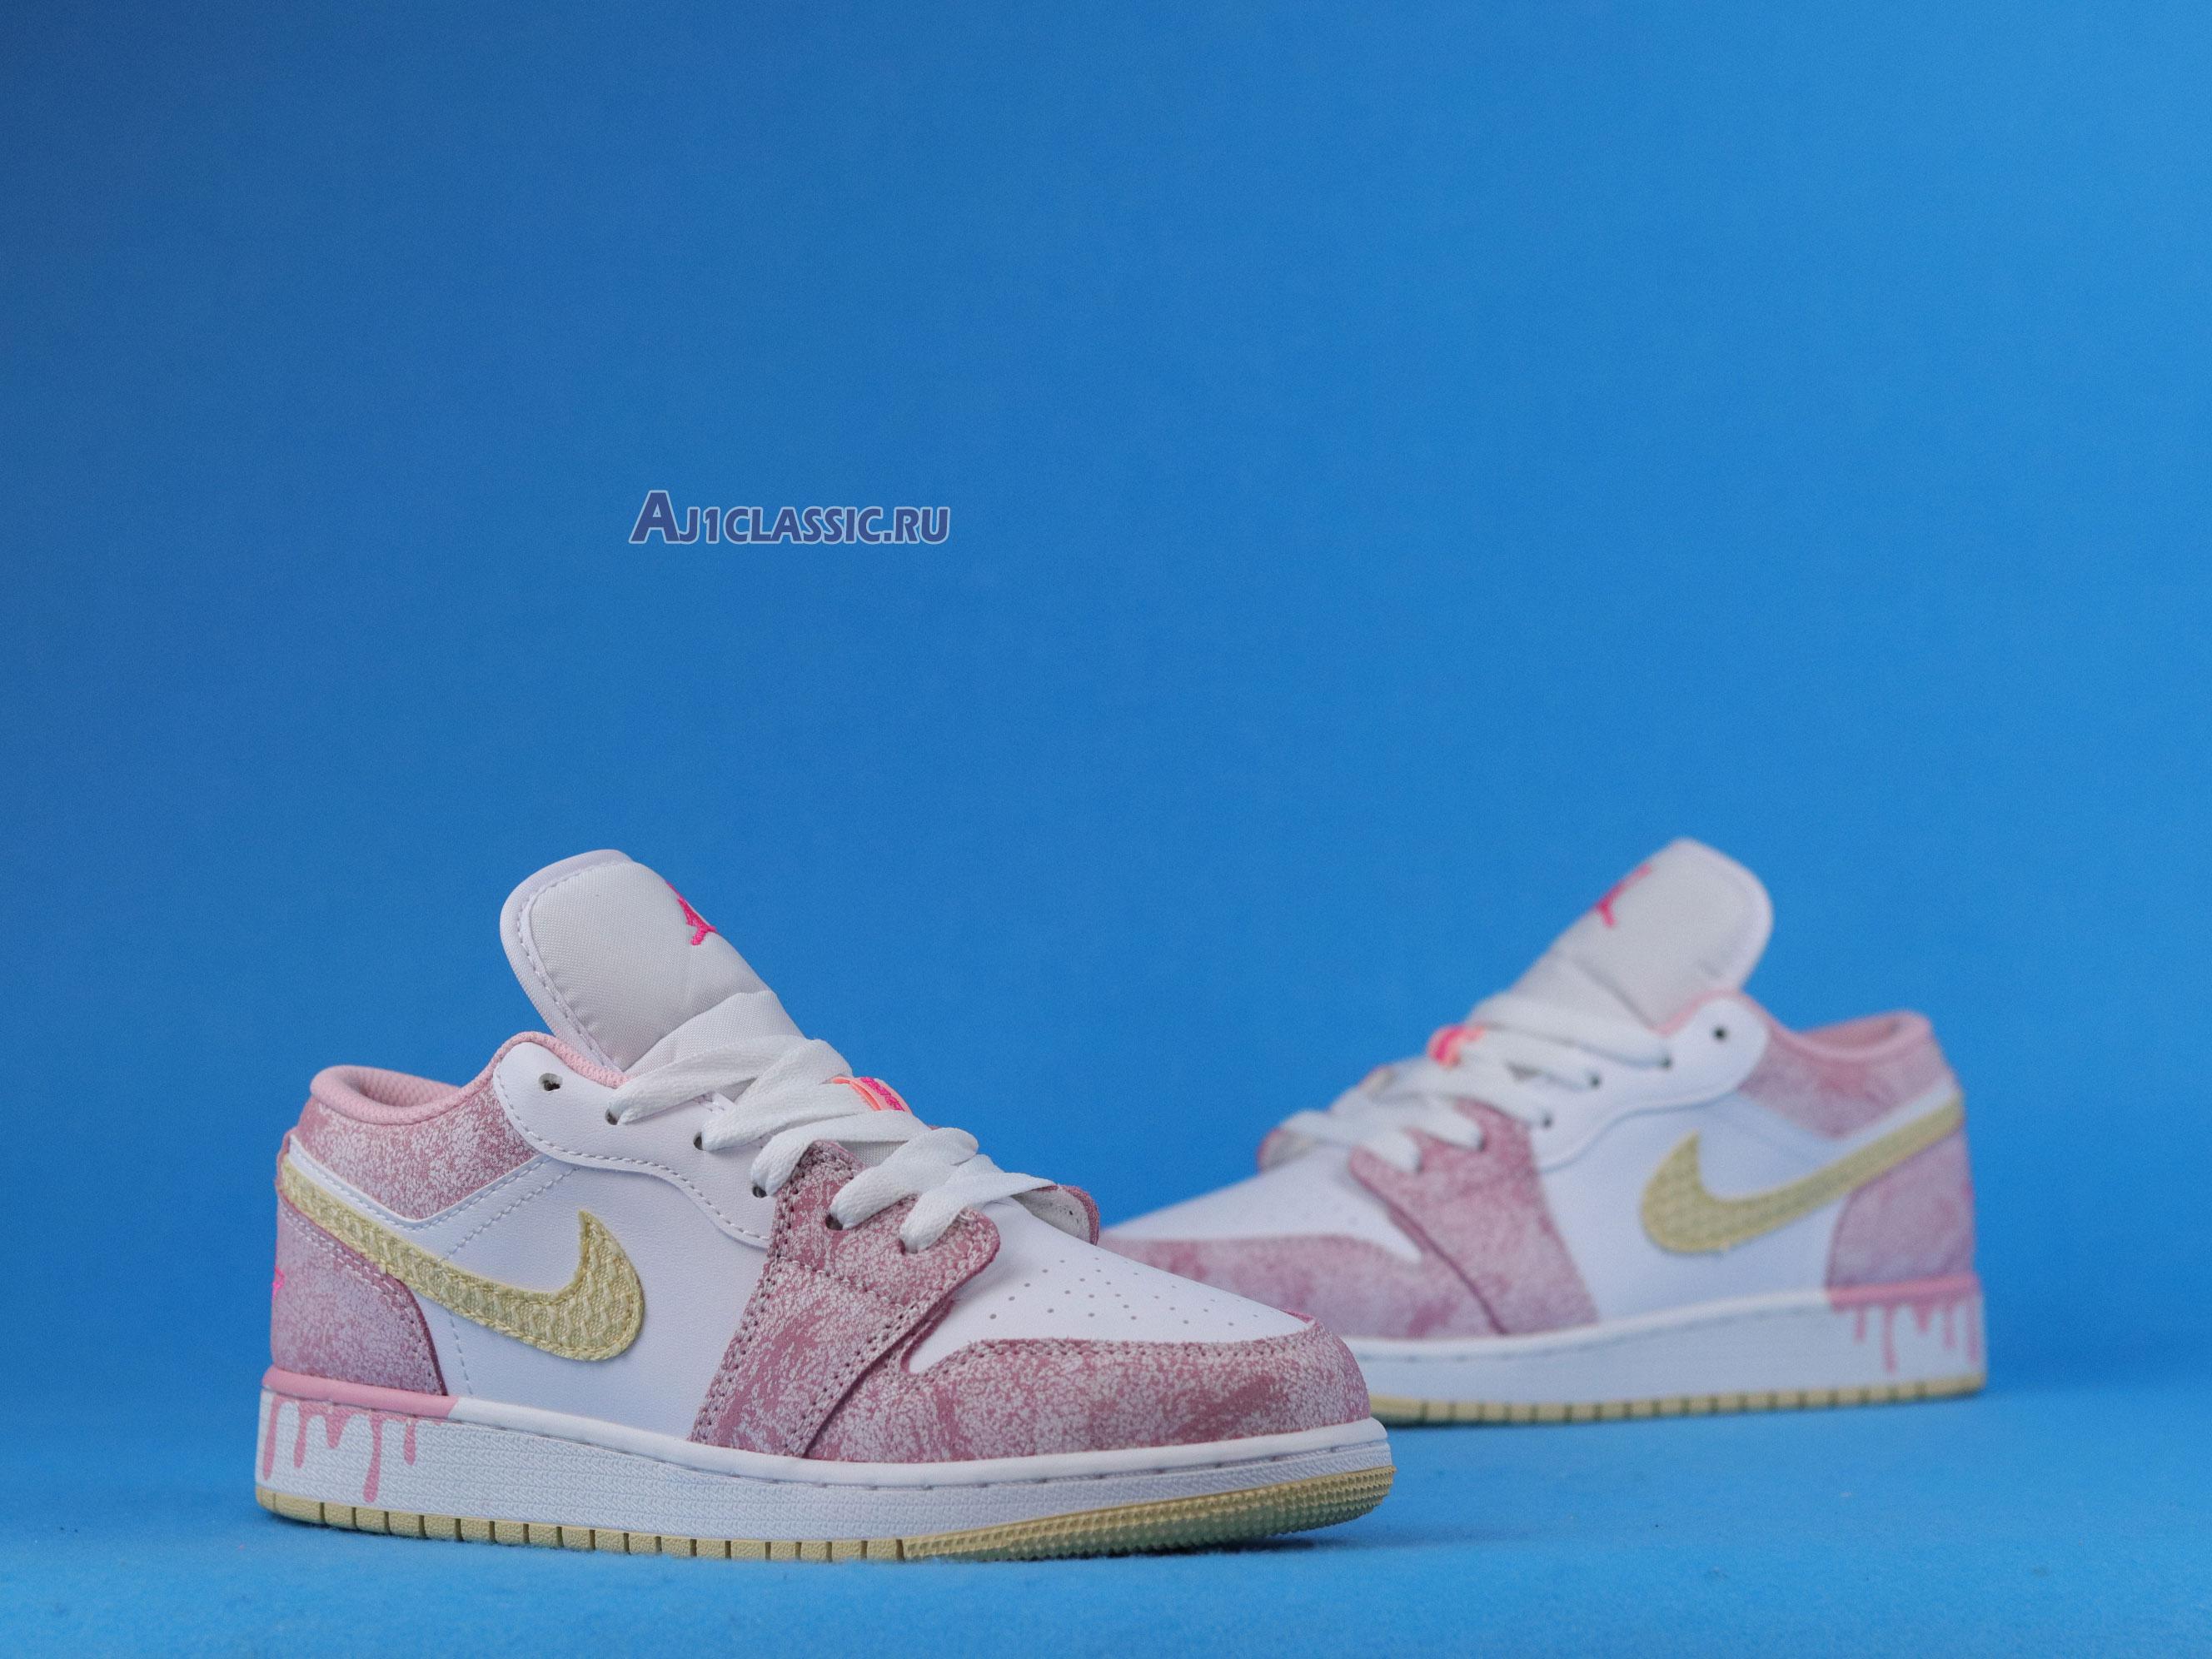 Air Jordan 1 Low GS Strawberry Ice Cream CW7104-601 Arctic Punch/Pale Vanilla/White Sneakers